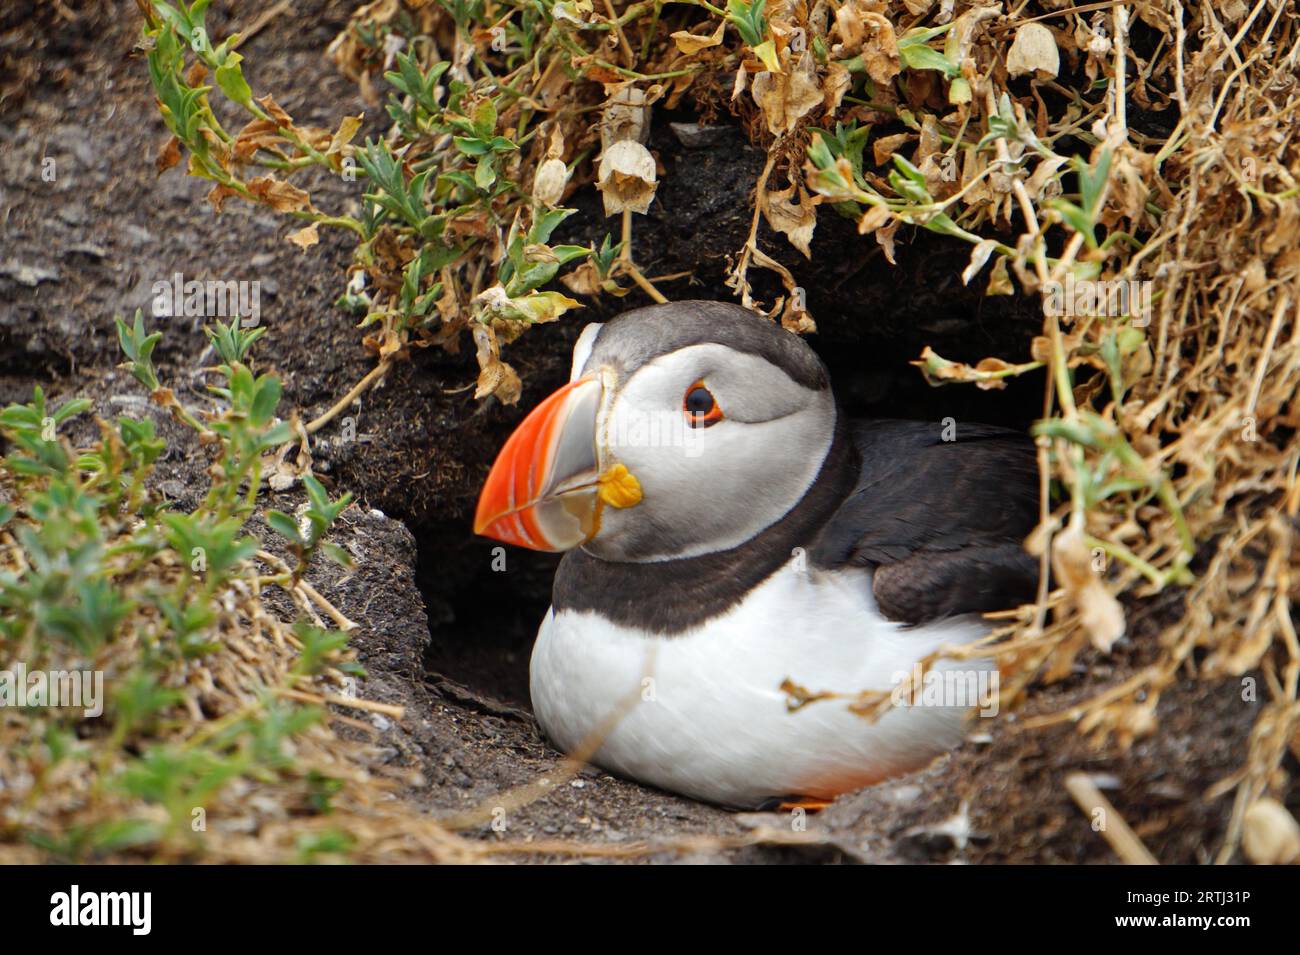 Puffins at the Skellig islands. The island of Skellig Michael, also known as the Great Skellig, is home to one of Ireland's best-known, yet Stock Photo